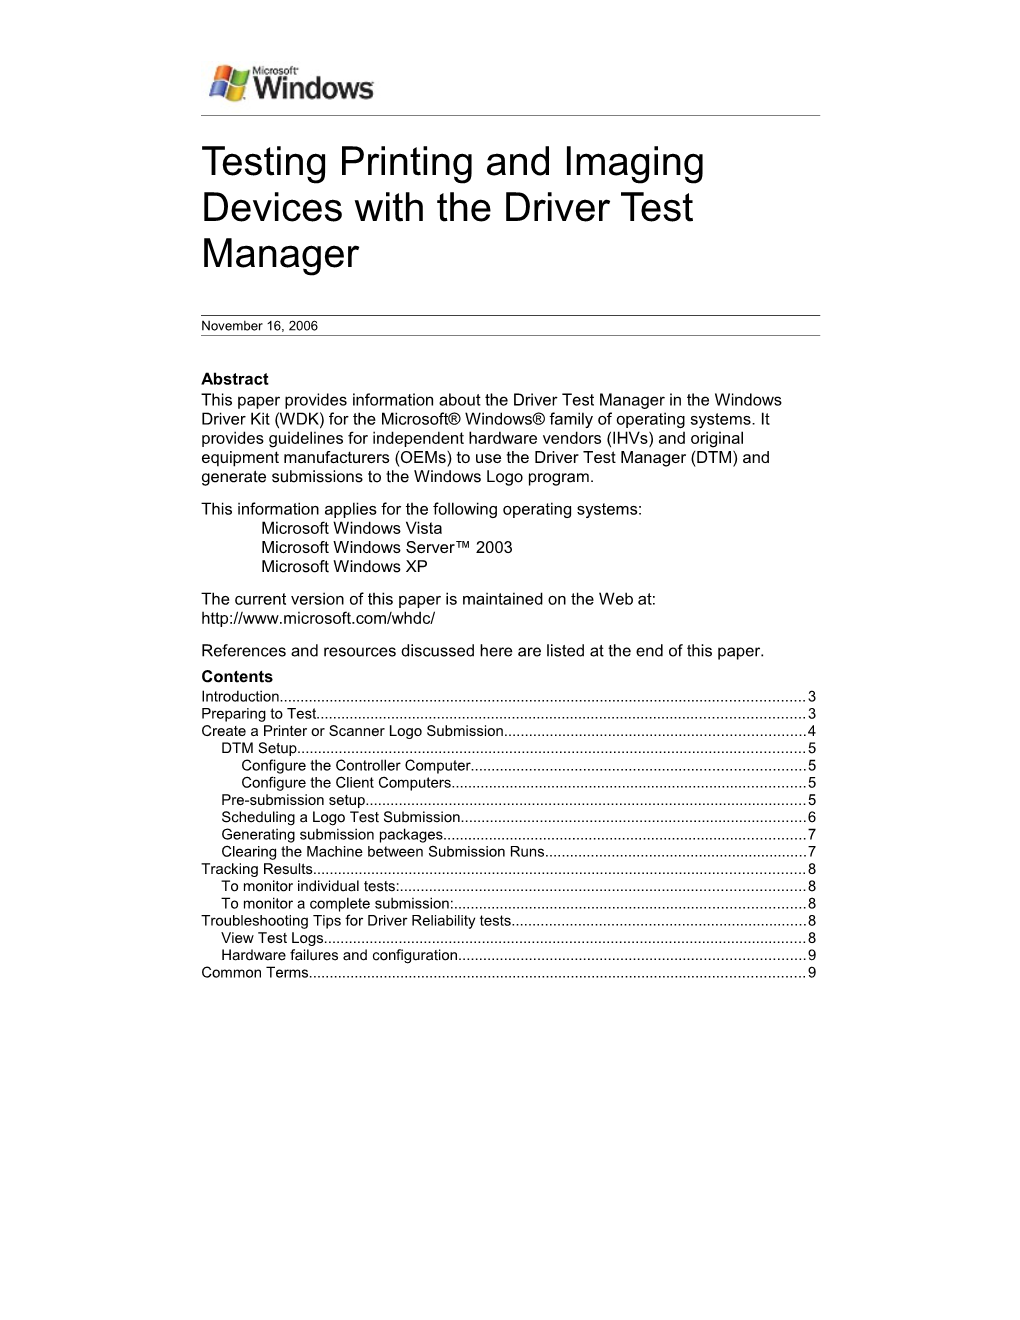 Testing Printing and Imaging Devices with the Driver Test Manager